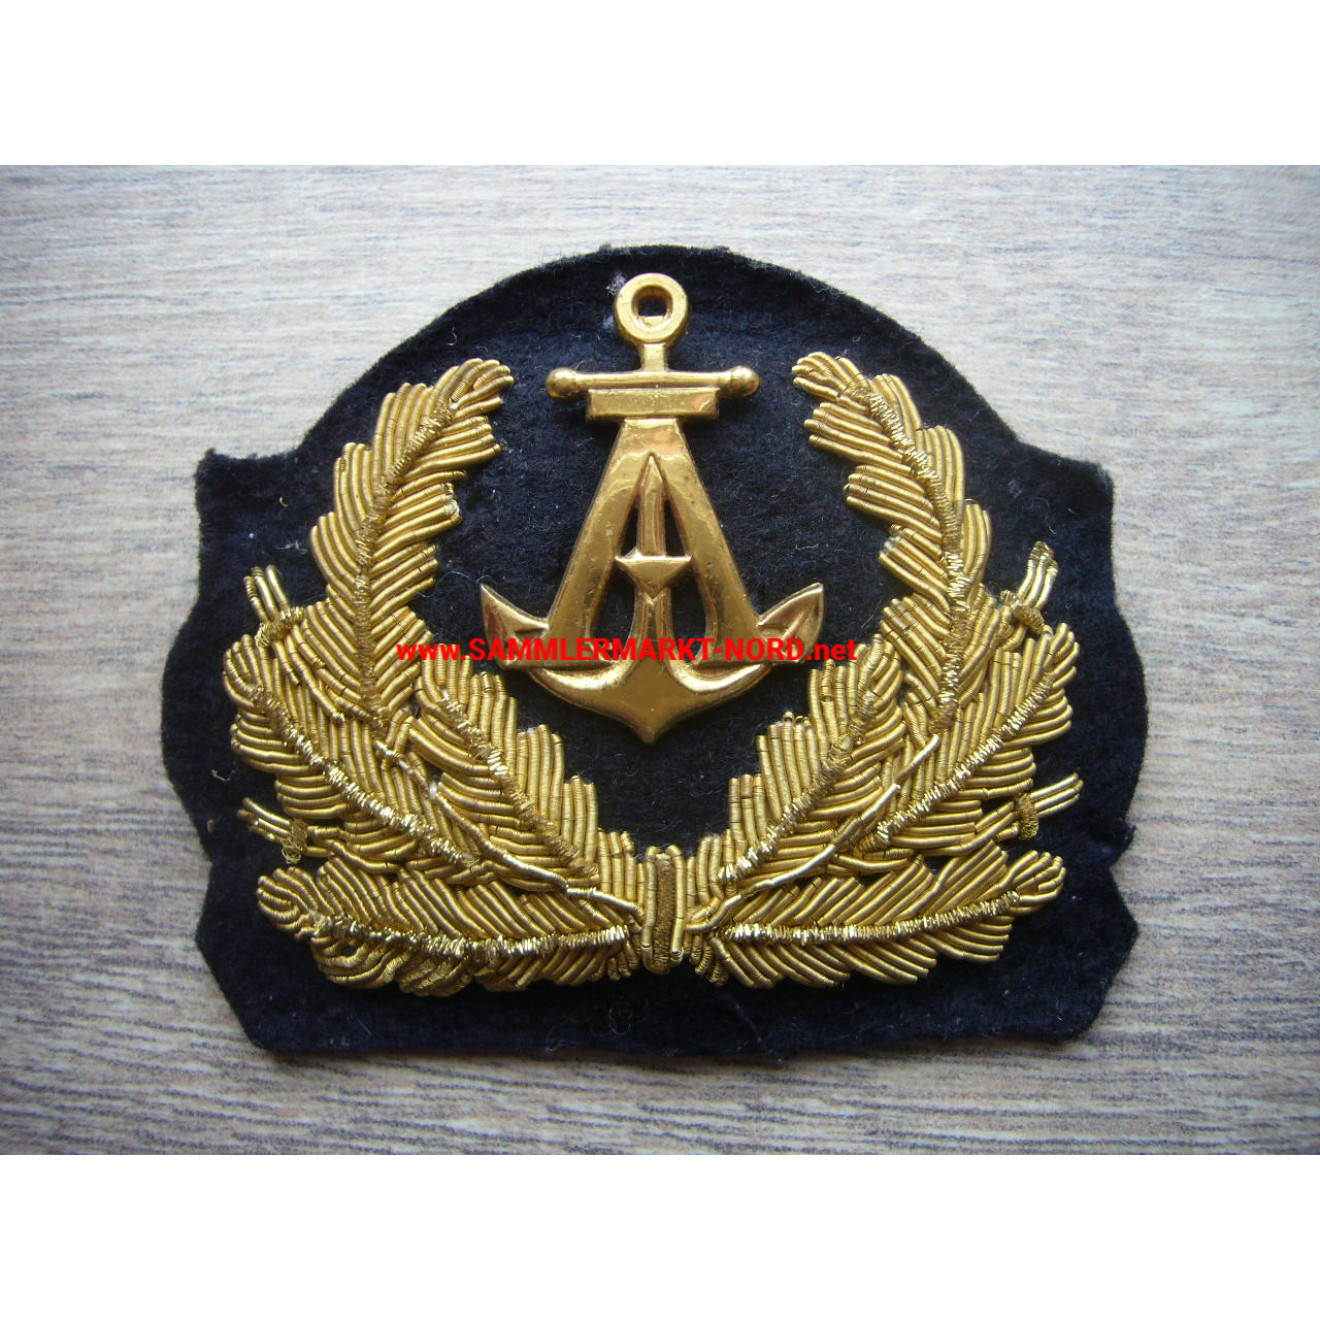 Sweden - shipping company / merchant navy - cap badge for officers